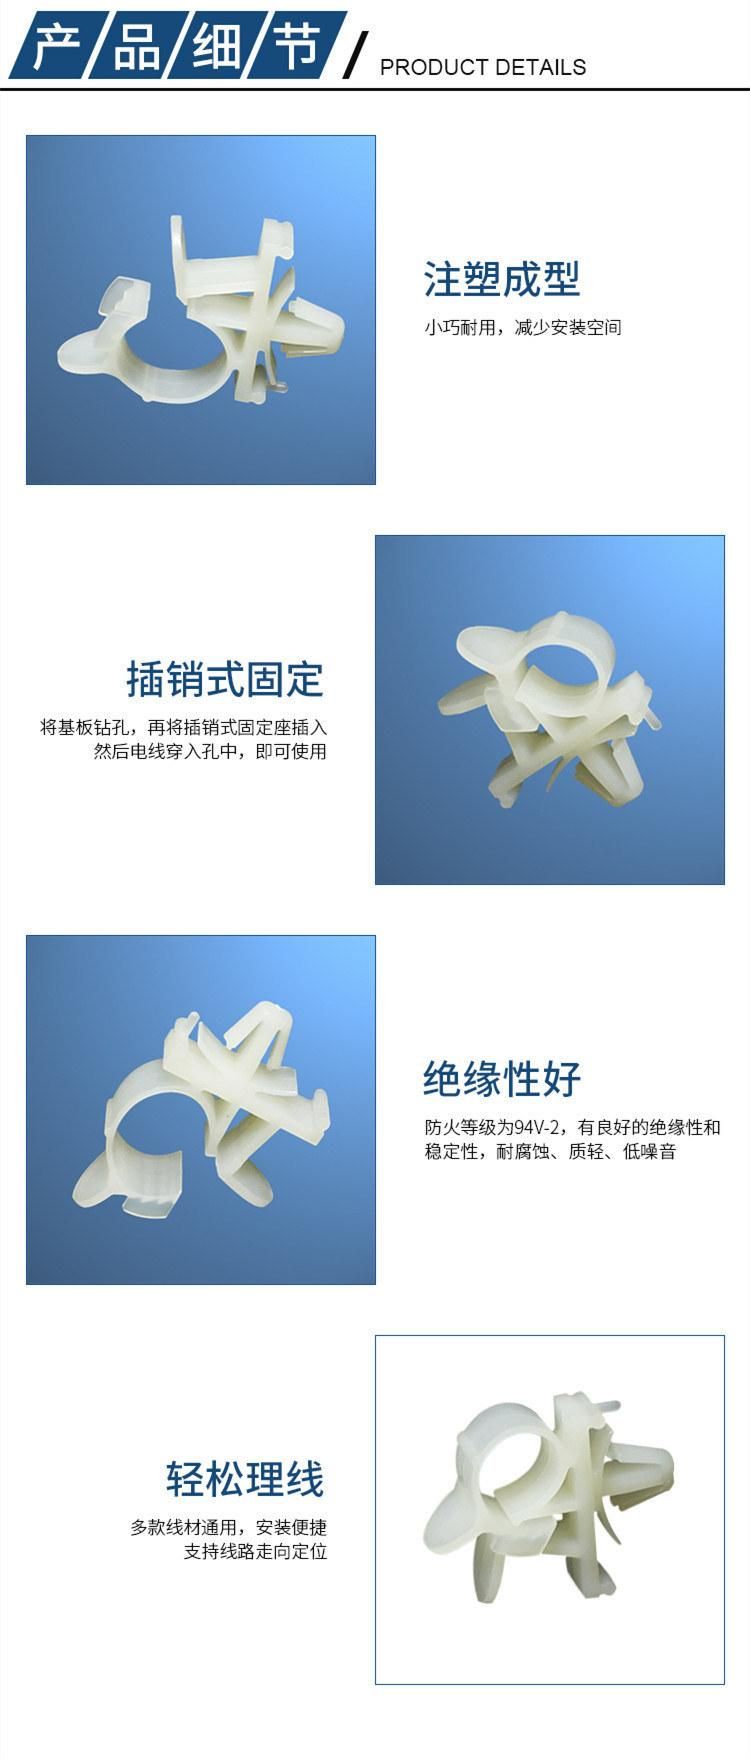 Wire and Cable Buckle Adjustable Cable Fixing, Heyingcn Factory Supply Insulation Nylon Cable Clip